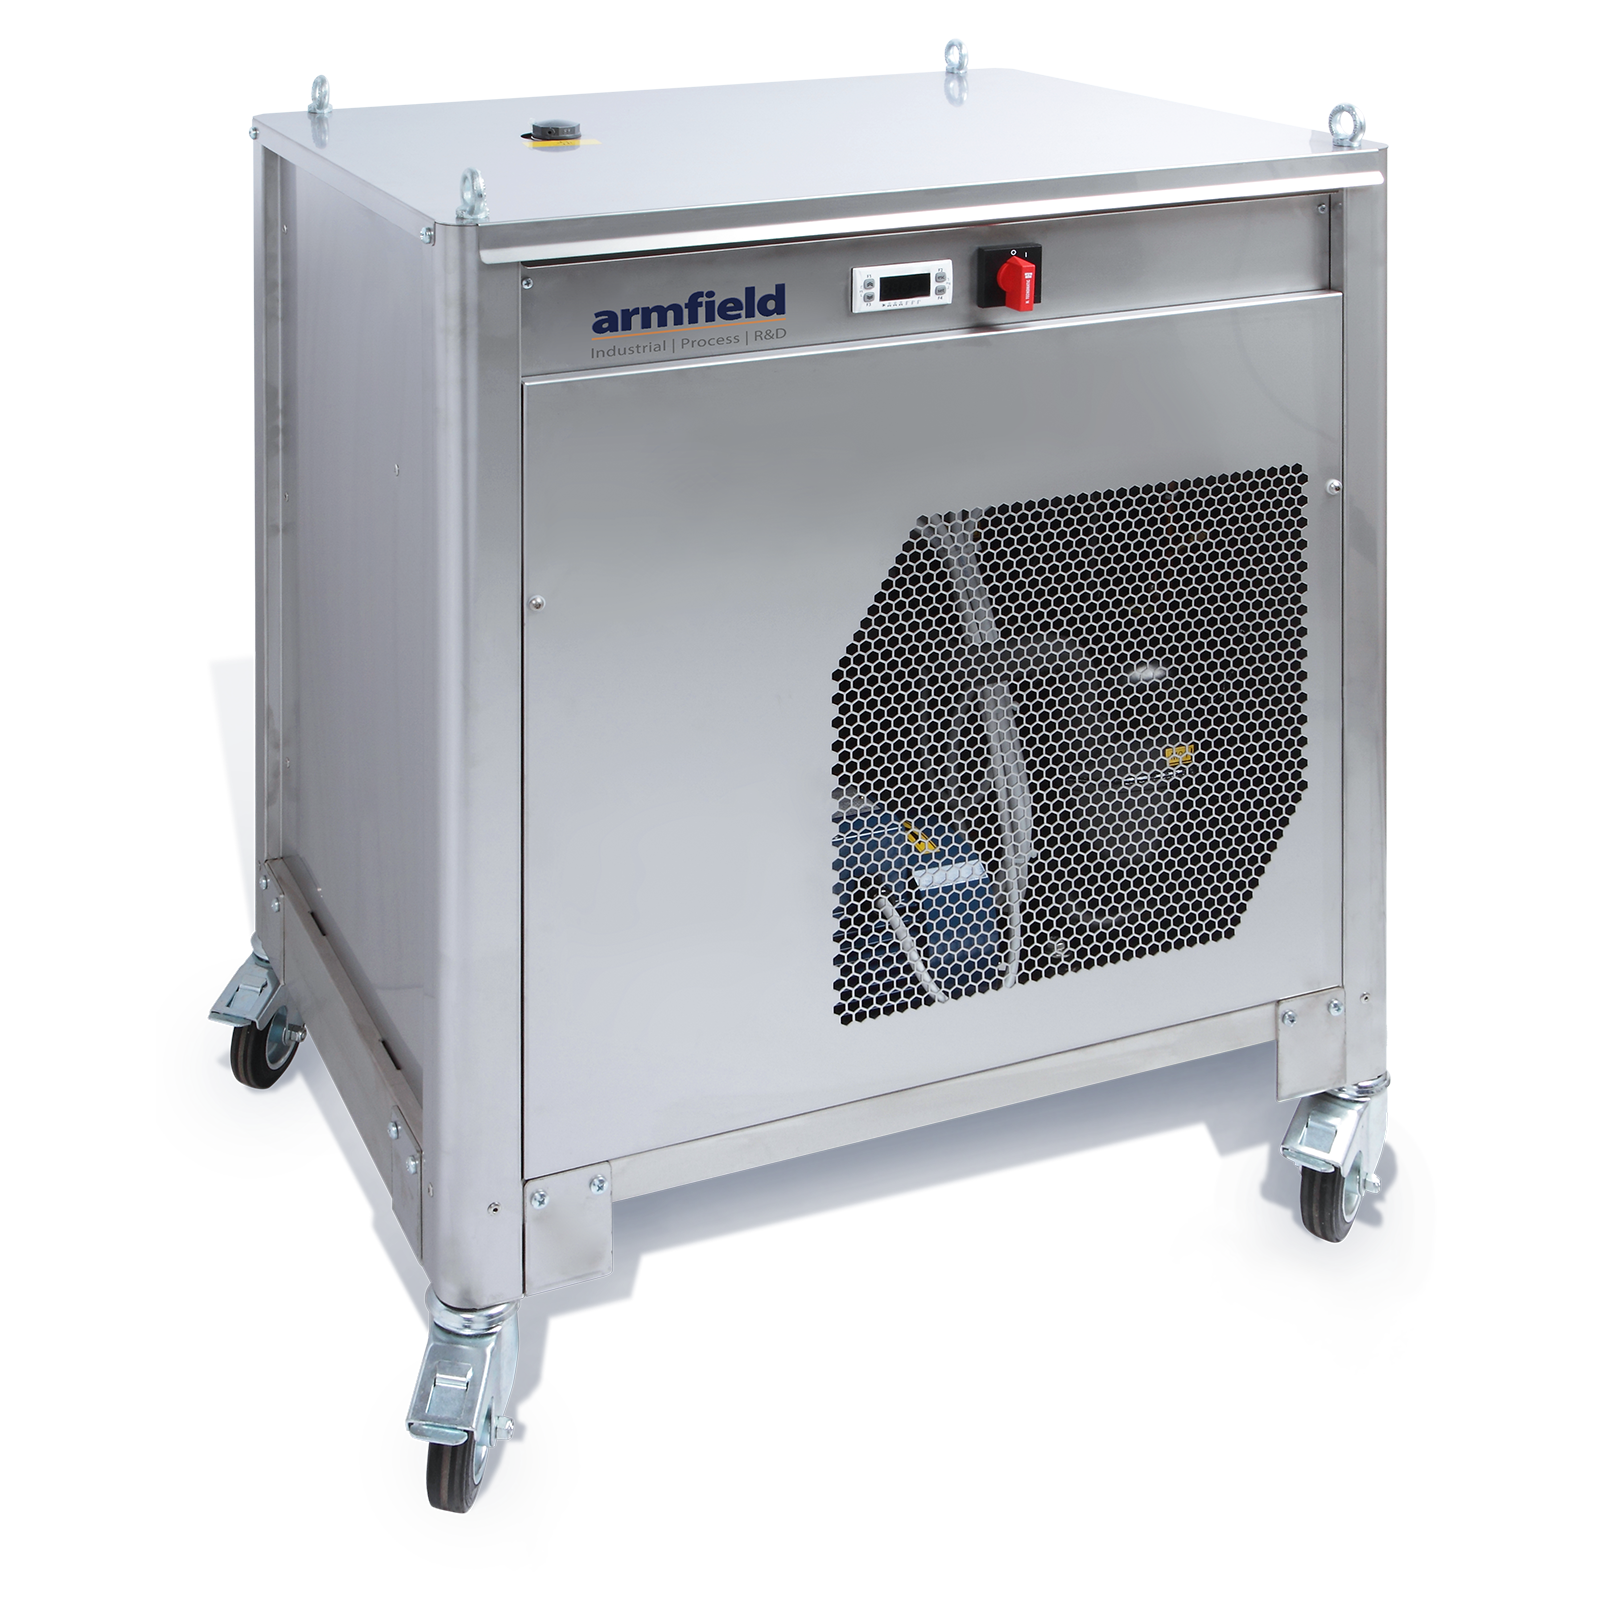 FT63 Laboratory Process Chiller